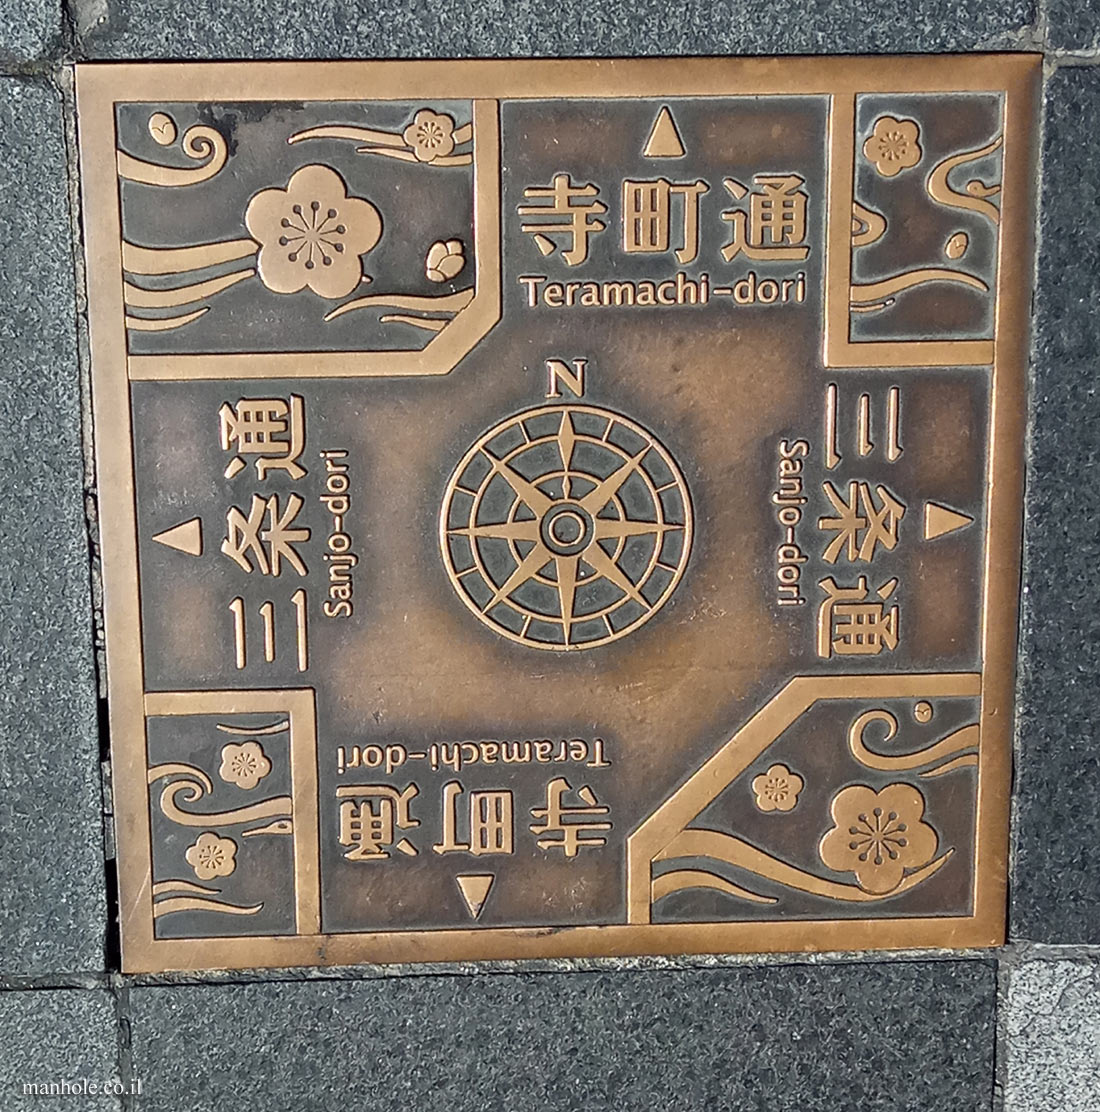 Kyoto - boards indicating directions to streets in the city